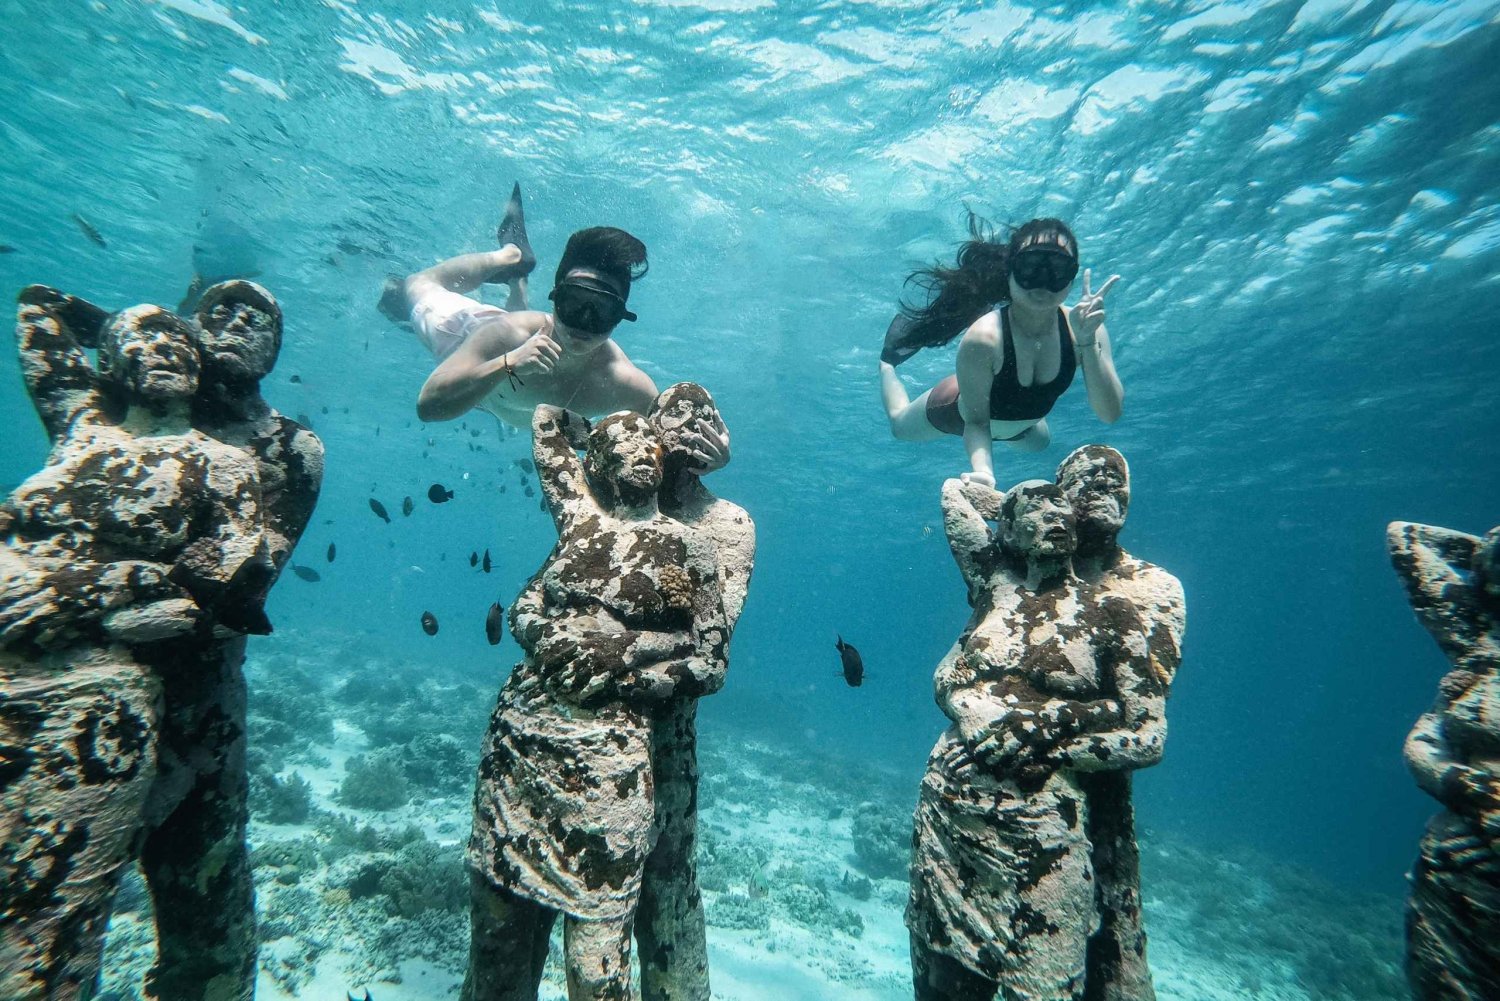 Gili Island: Group or Private Snorkeling Tour